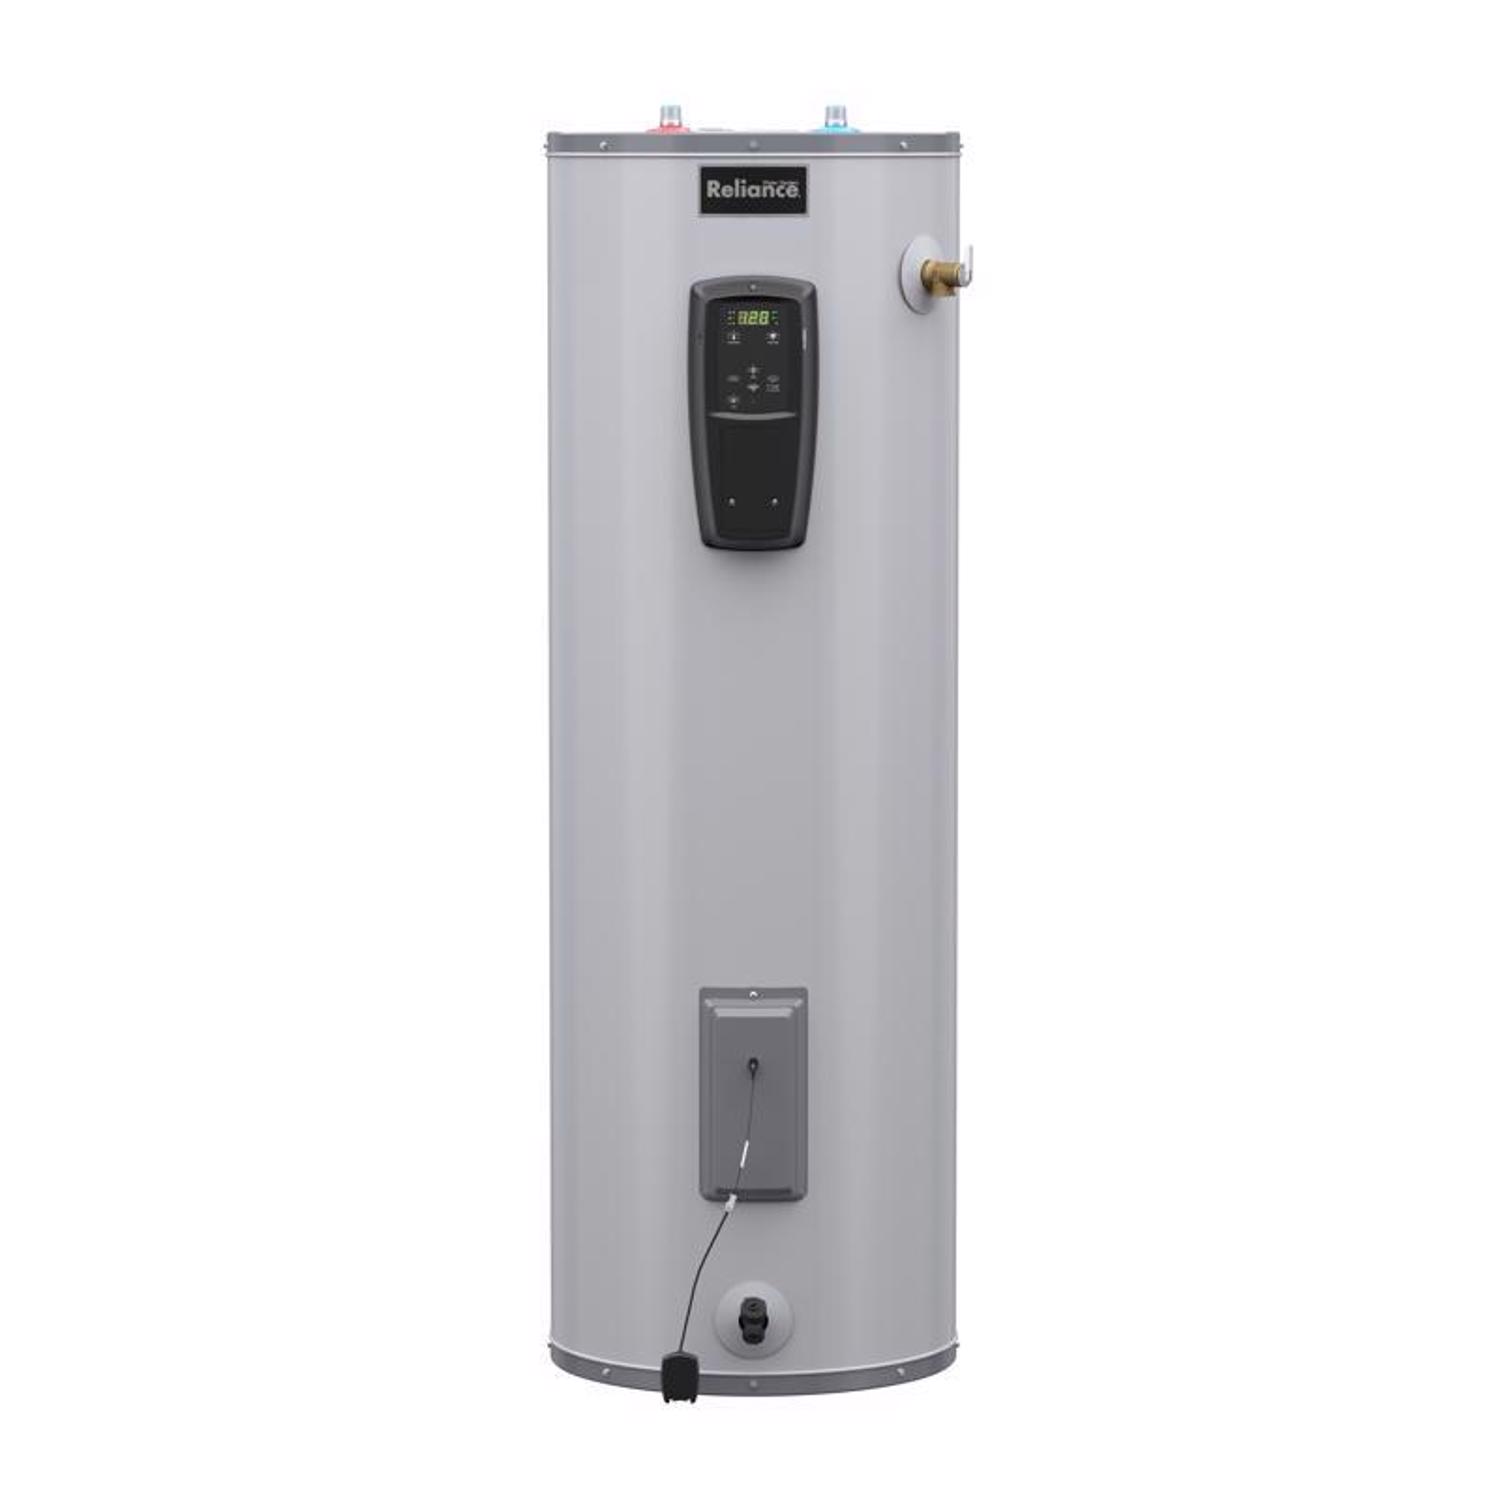 Photos - Other sanitary accessories Reliance Water Heaters 50 gal 4500 W Electric Water Heater 9-50-DHRT